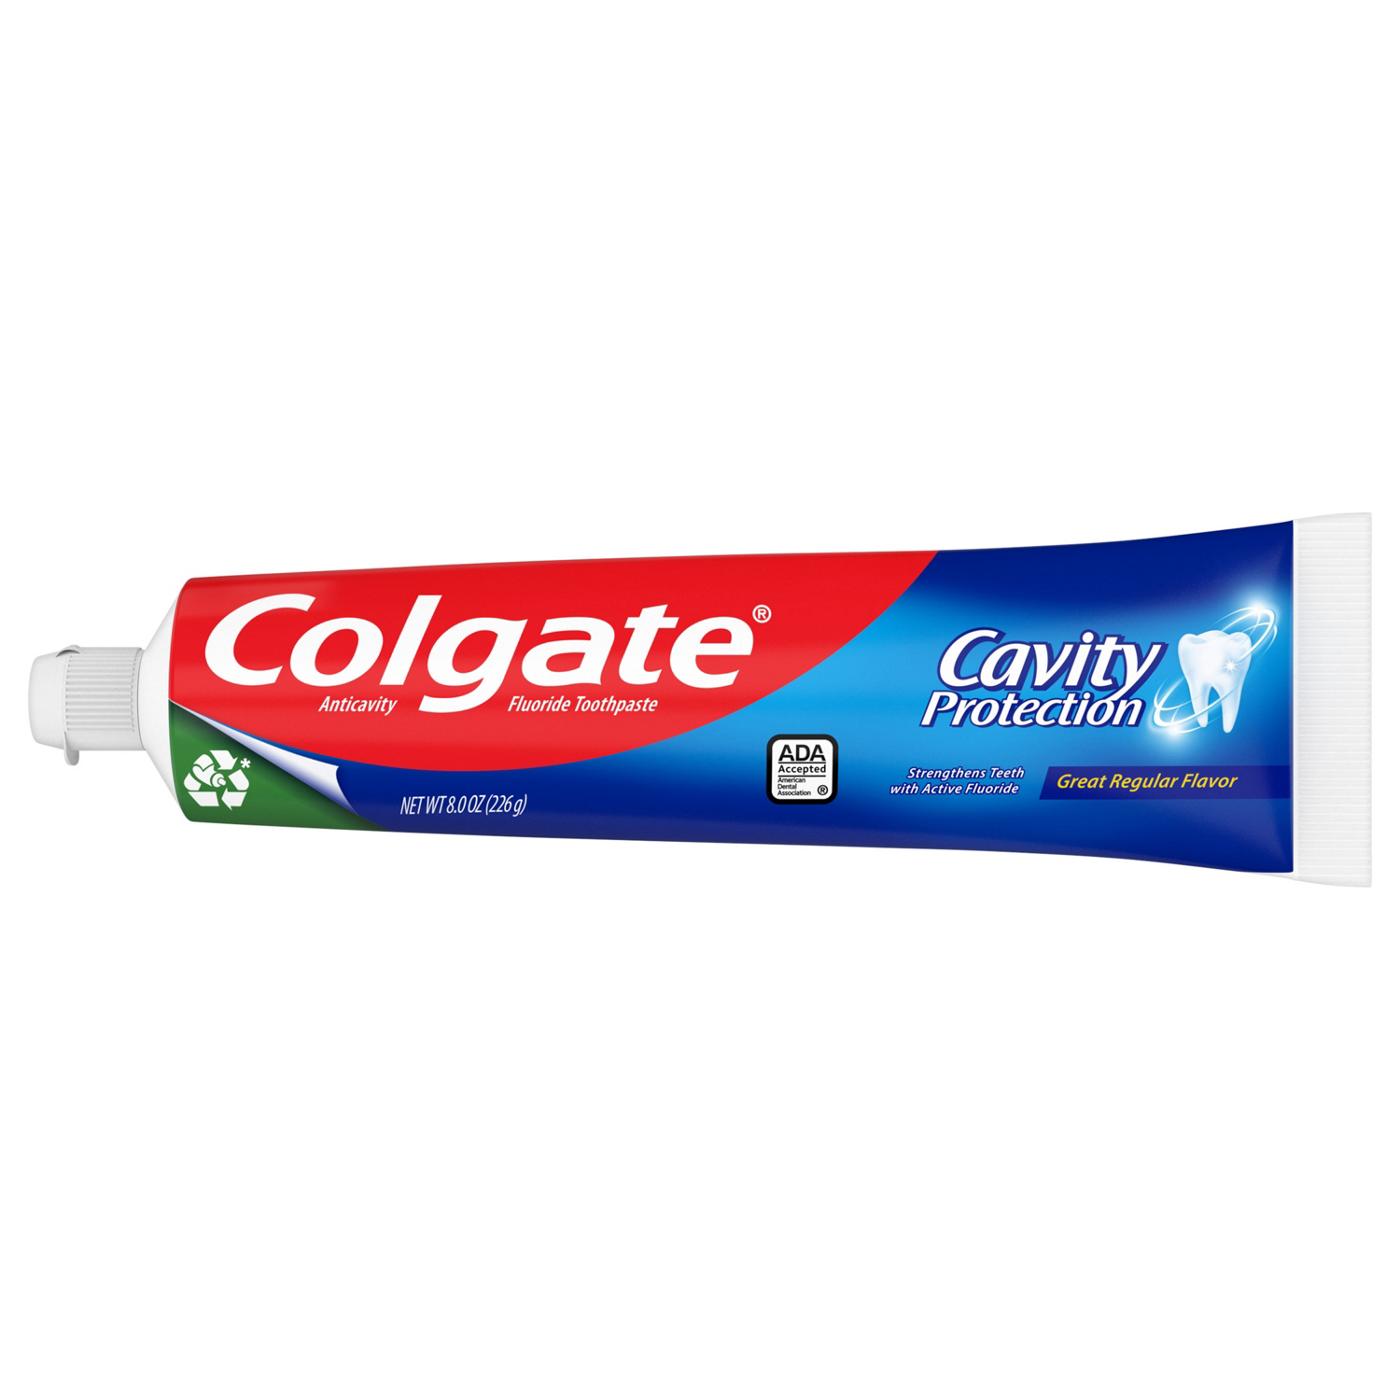 Colgate Cavity Protection Anticavity Toothpaste, 2 Pk; image 2 of 3